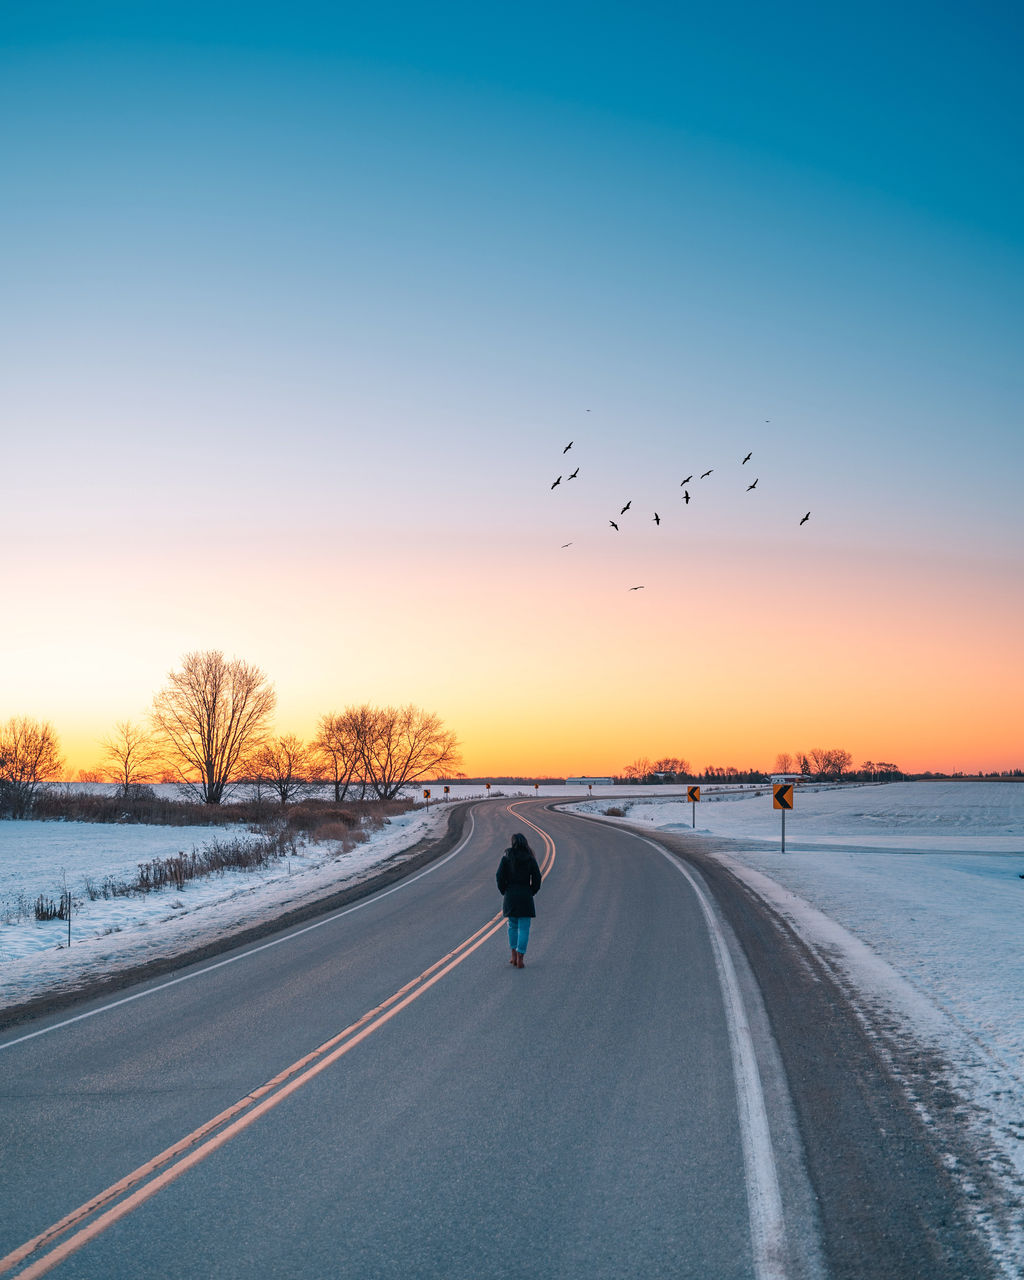 View of birds on road during winter